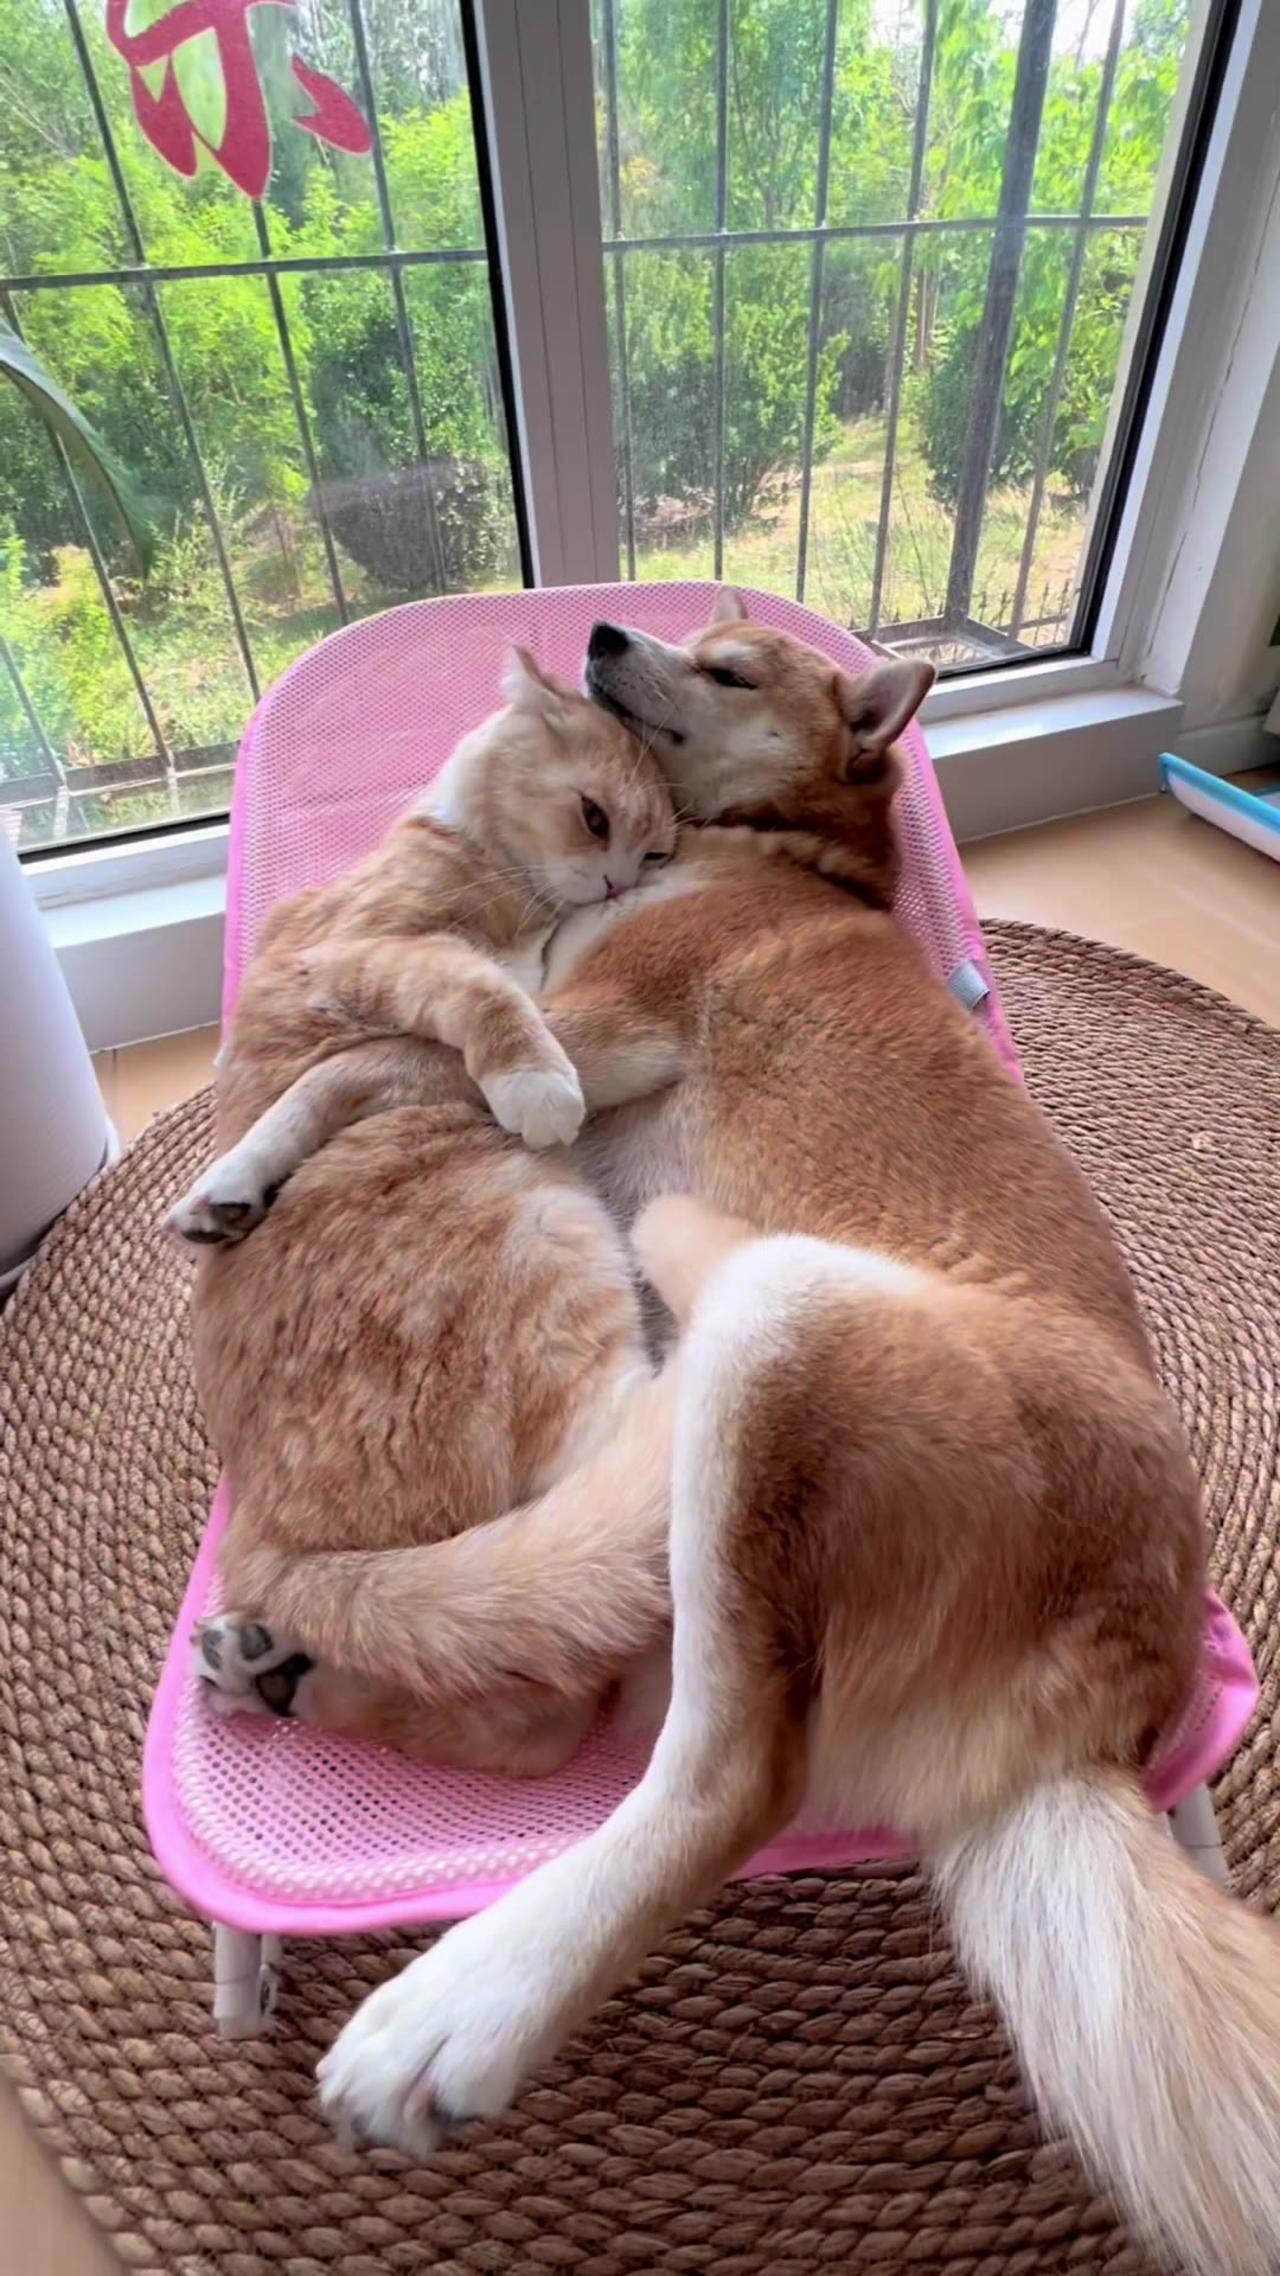 True Love Between Dog and Cat - So Sweet!